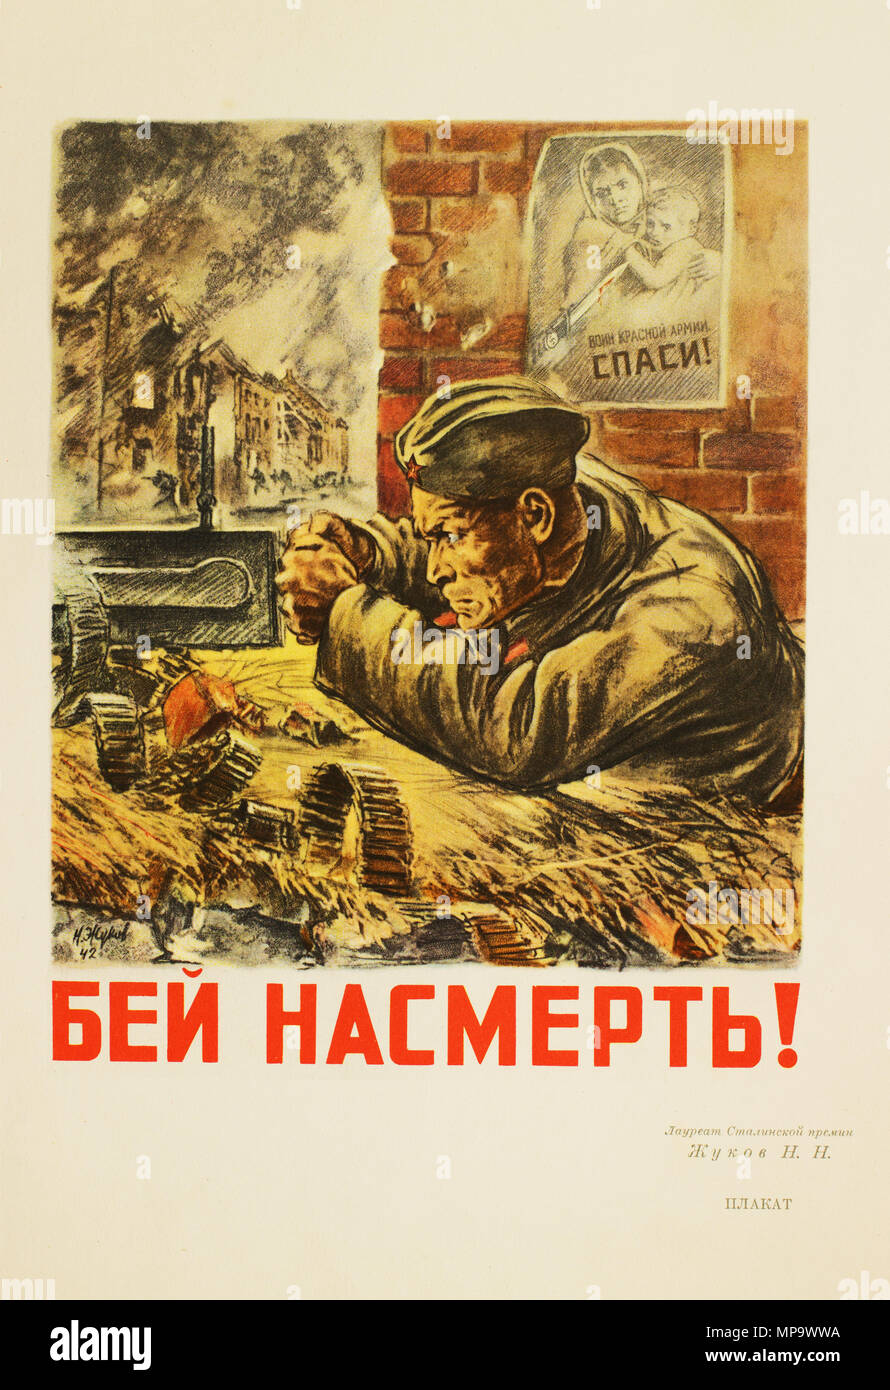 Soviet poster of the Second World War 'Beat to death!'. 1942. The author is the Stalin Prize laureate Zhukov N.N. Stock Photo